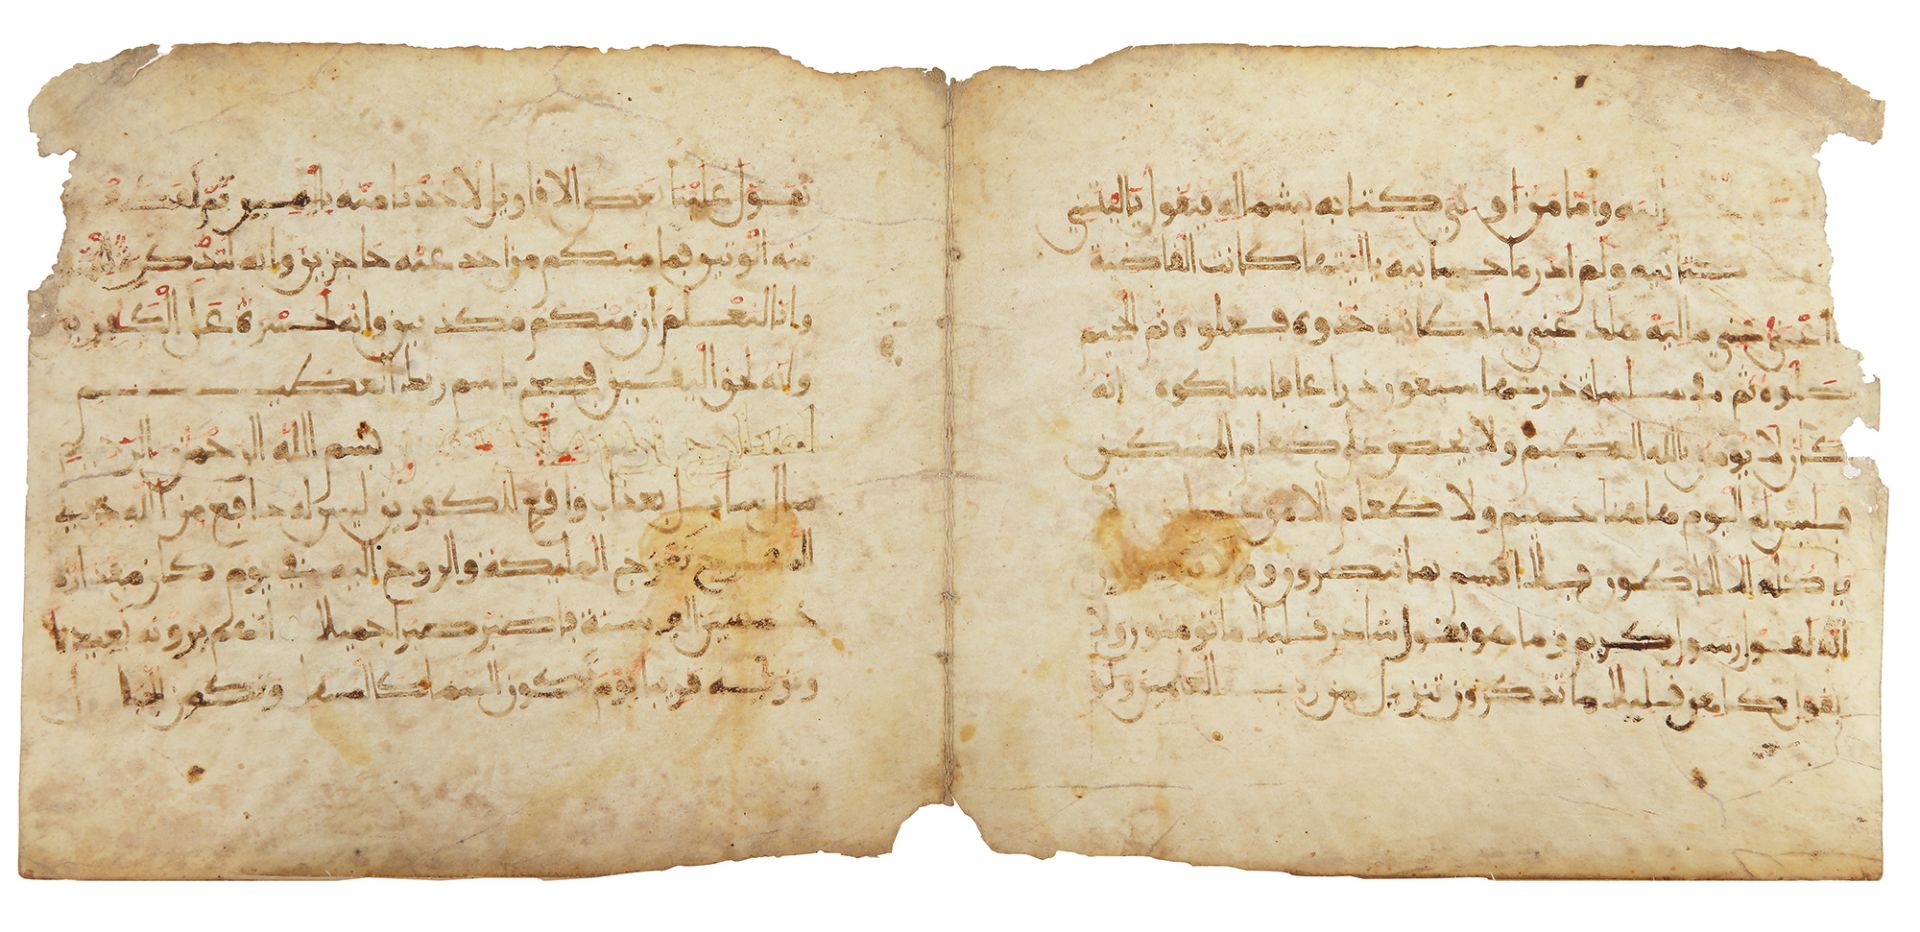 TWO QURAN FOLIOS FROM A MAGHRIBI QURAN, NORTH AFRICA, 13TH-14TH CENTURY - Image 2 of 4